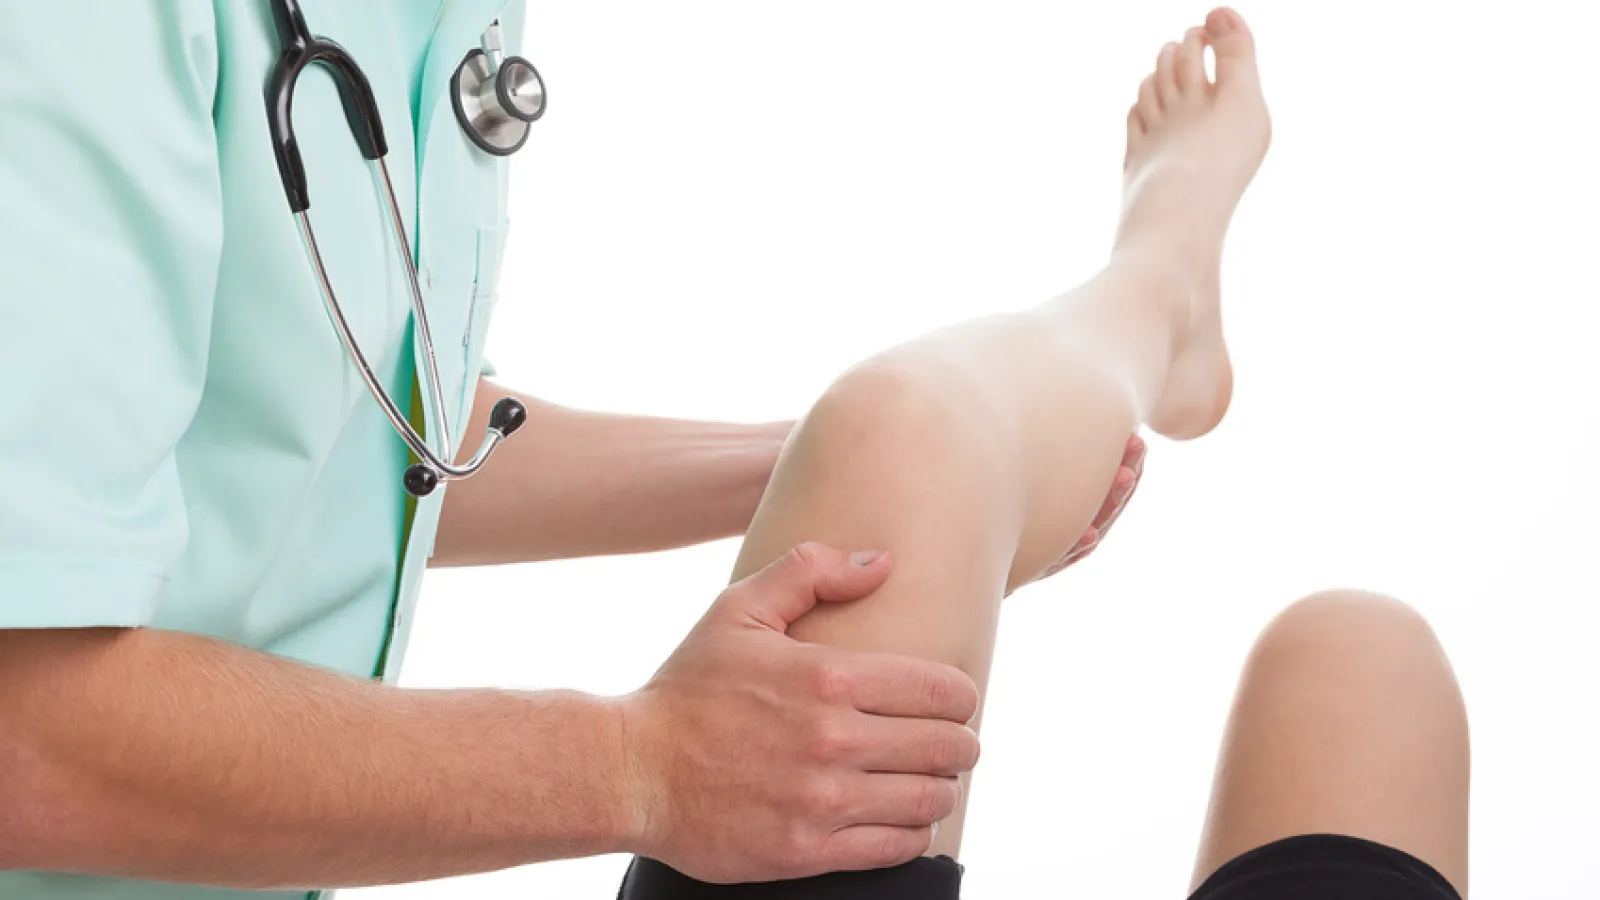  															WHAT CAN I EXPECT DURING KNEE REPLACEMENT THERAPY?														